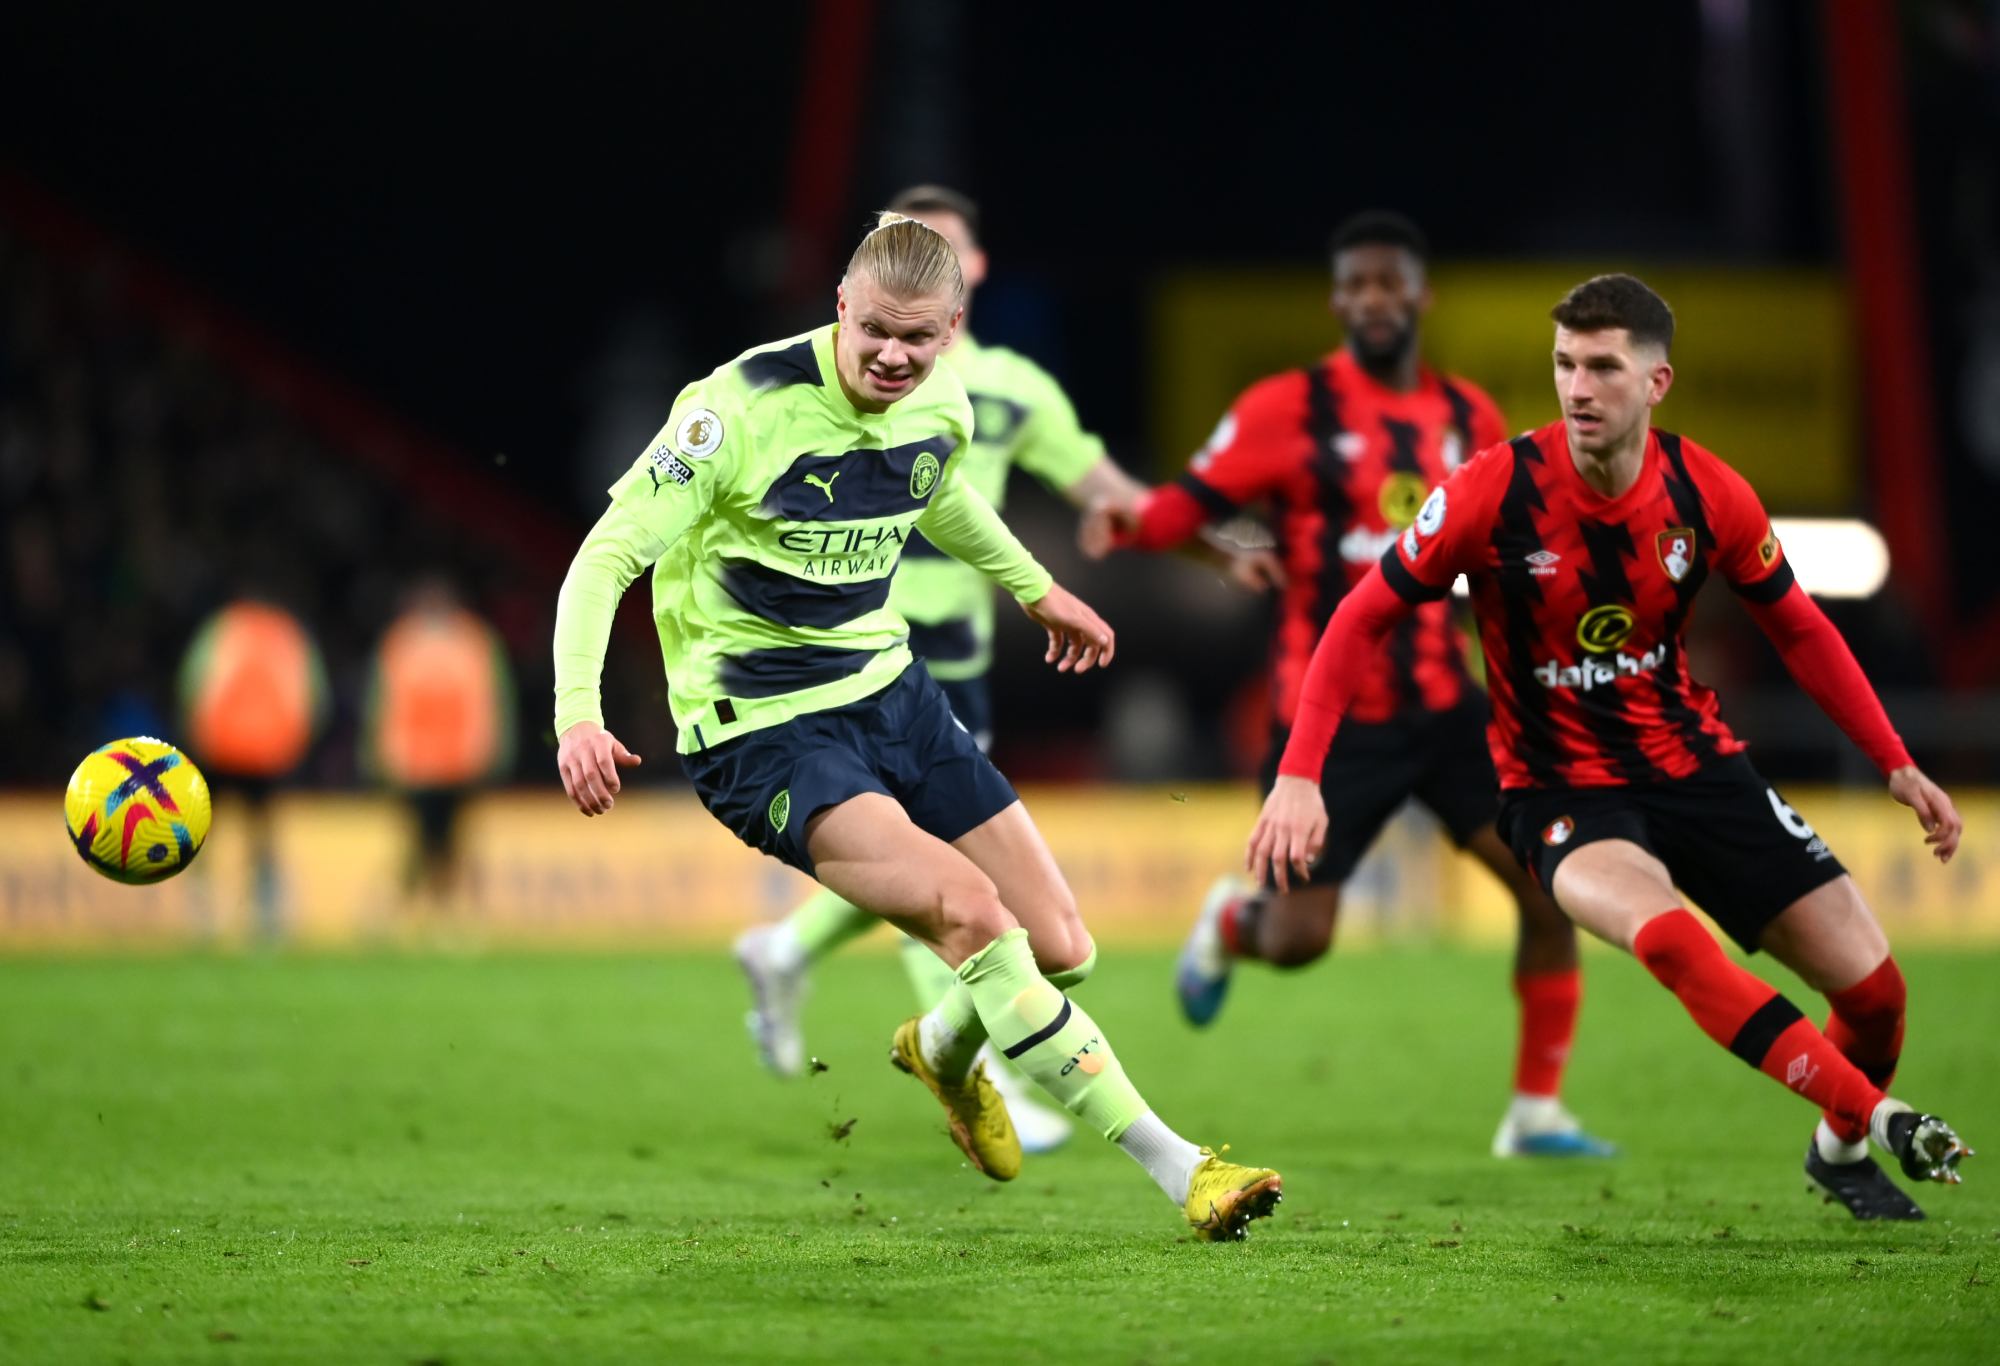 BOURNEMOUTH, ENGLAND - FEBRUARY 25: Erling Haaland of Manchester City runs with the ball during the Premier League match between AFC Bournemouth and Manchester City at Vitality Stadium on February 25, 2023 in Bournemouth, England. (Photo by Manchester City FC/Manchester City FC via Getty Images)